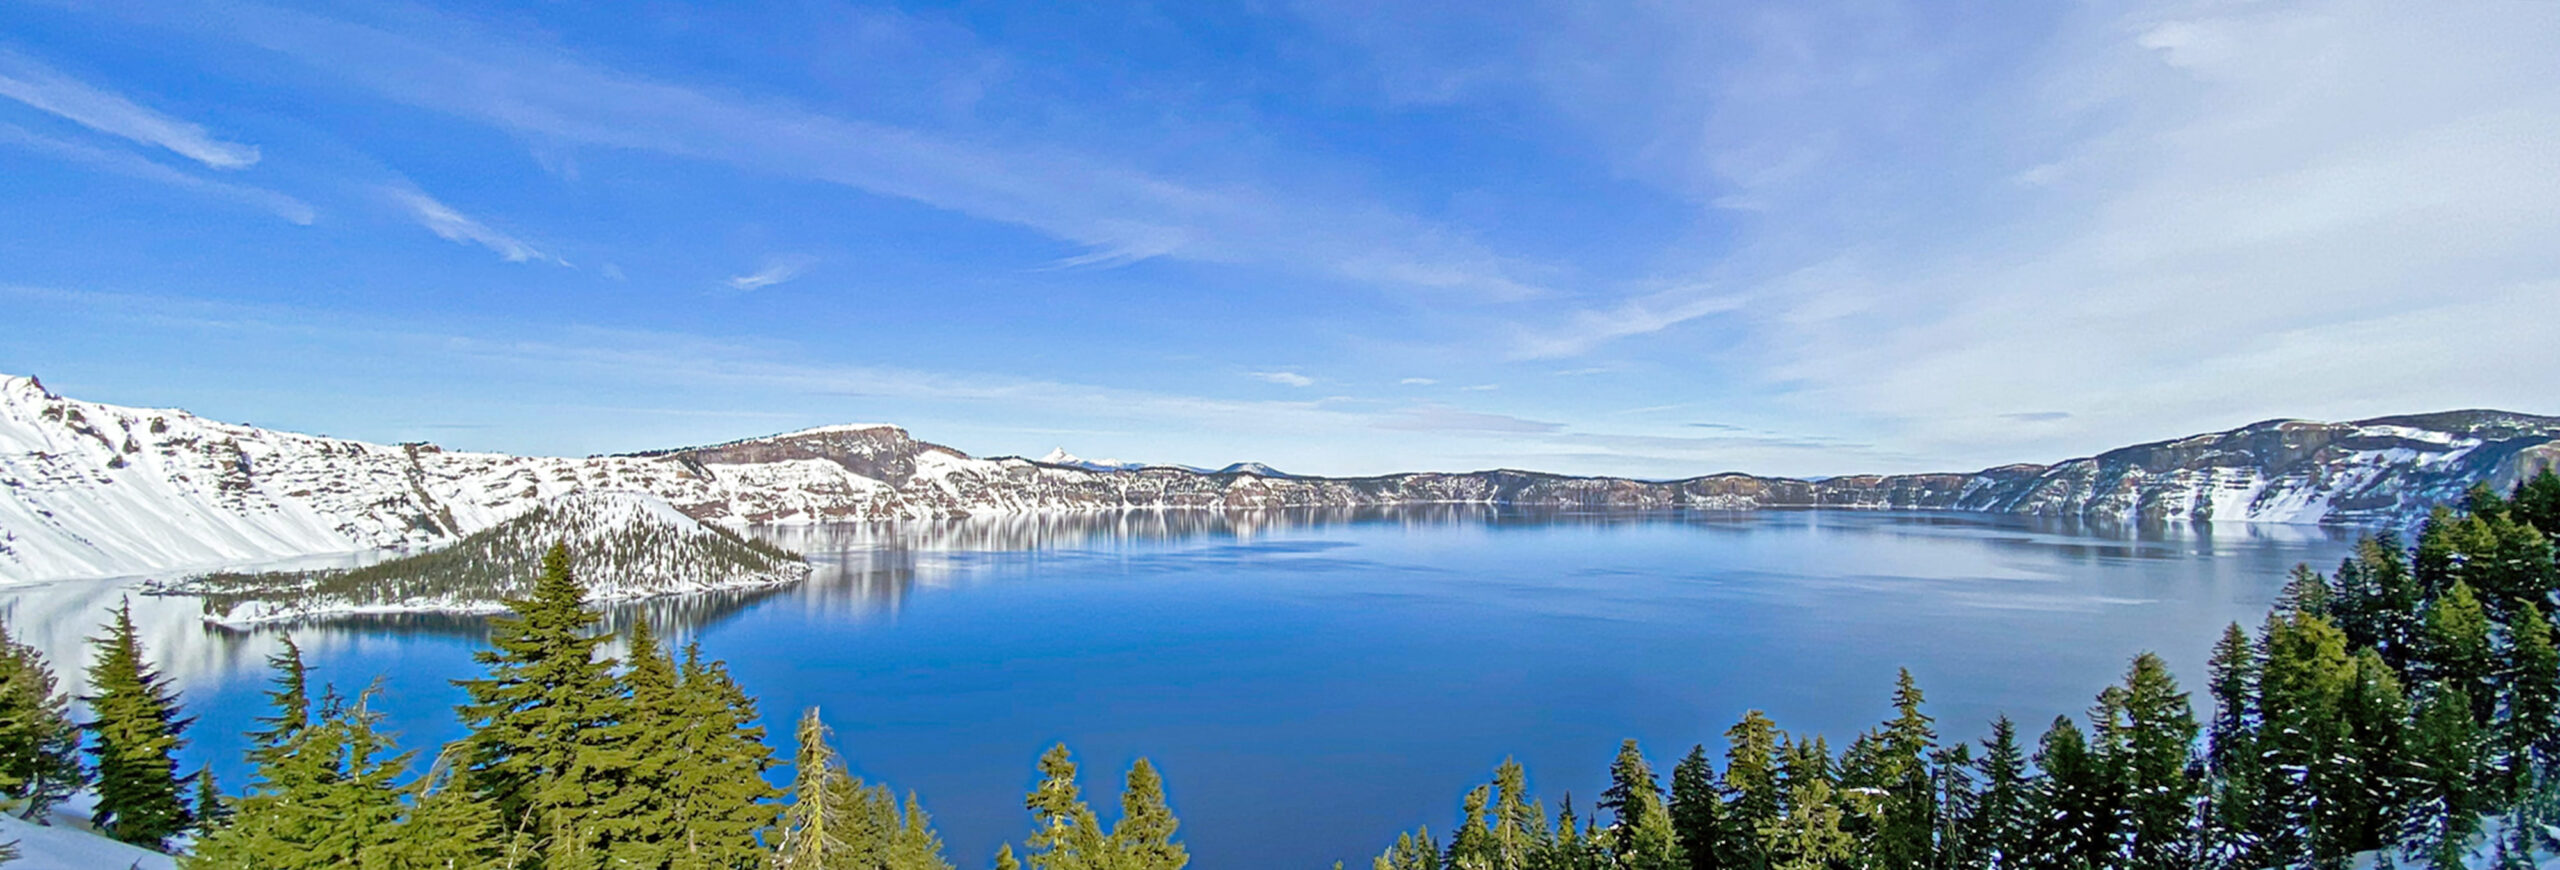 Oregon's Crater Lake in winter with blue sky and snow.